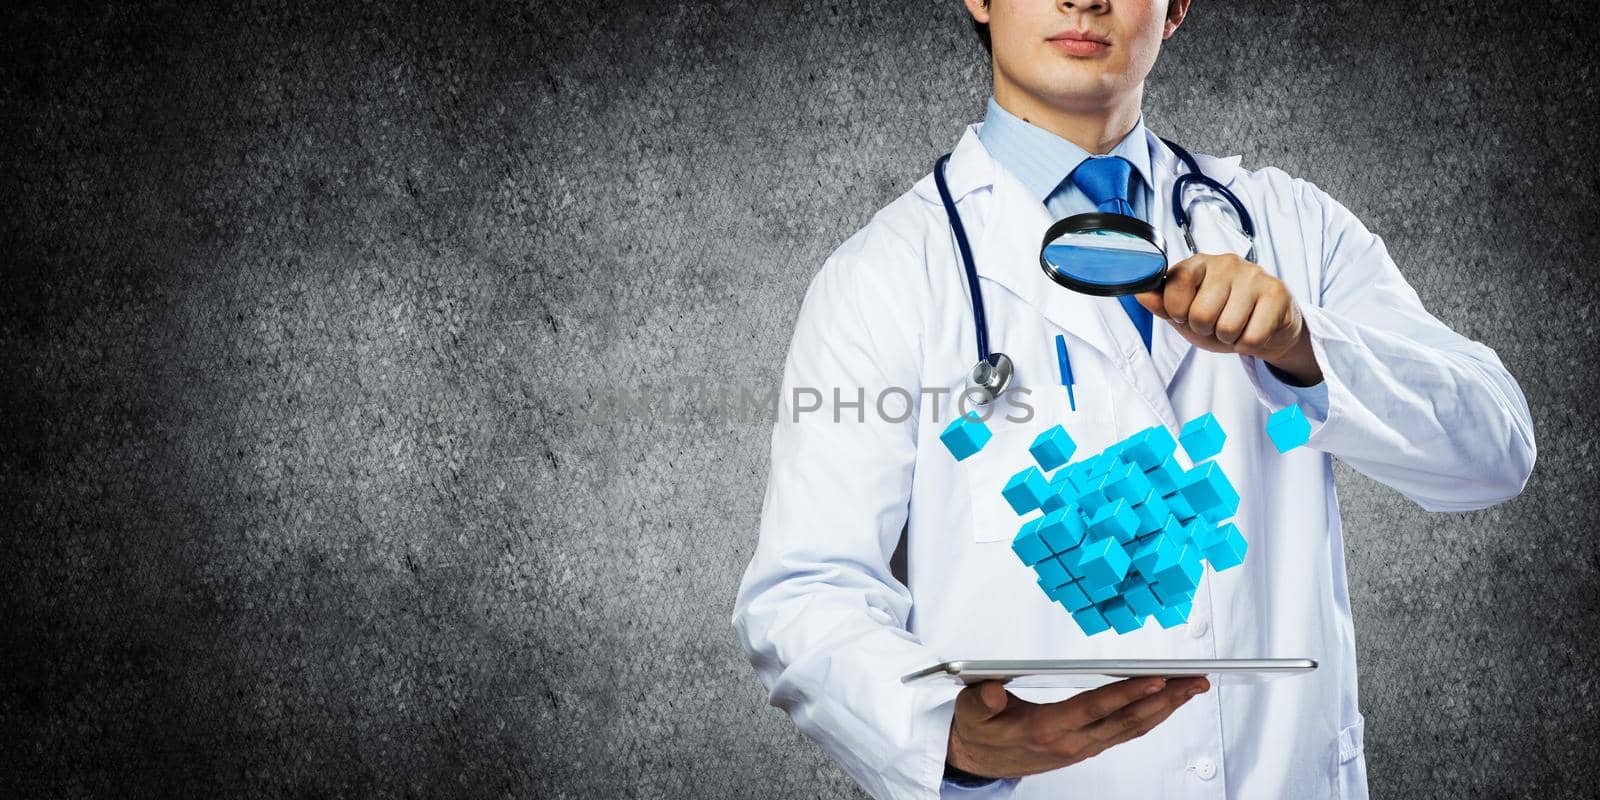 Close up of confident doctor in white sterile suit and with stethoscope looking through magnifier at multiple cubes while standing against gray background.